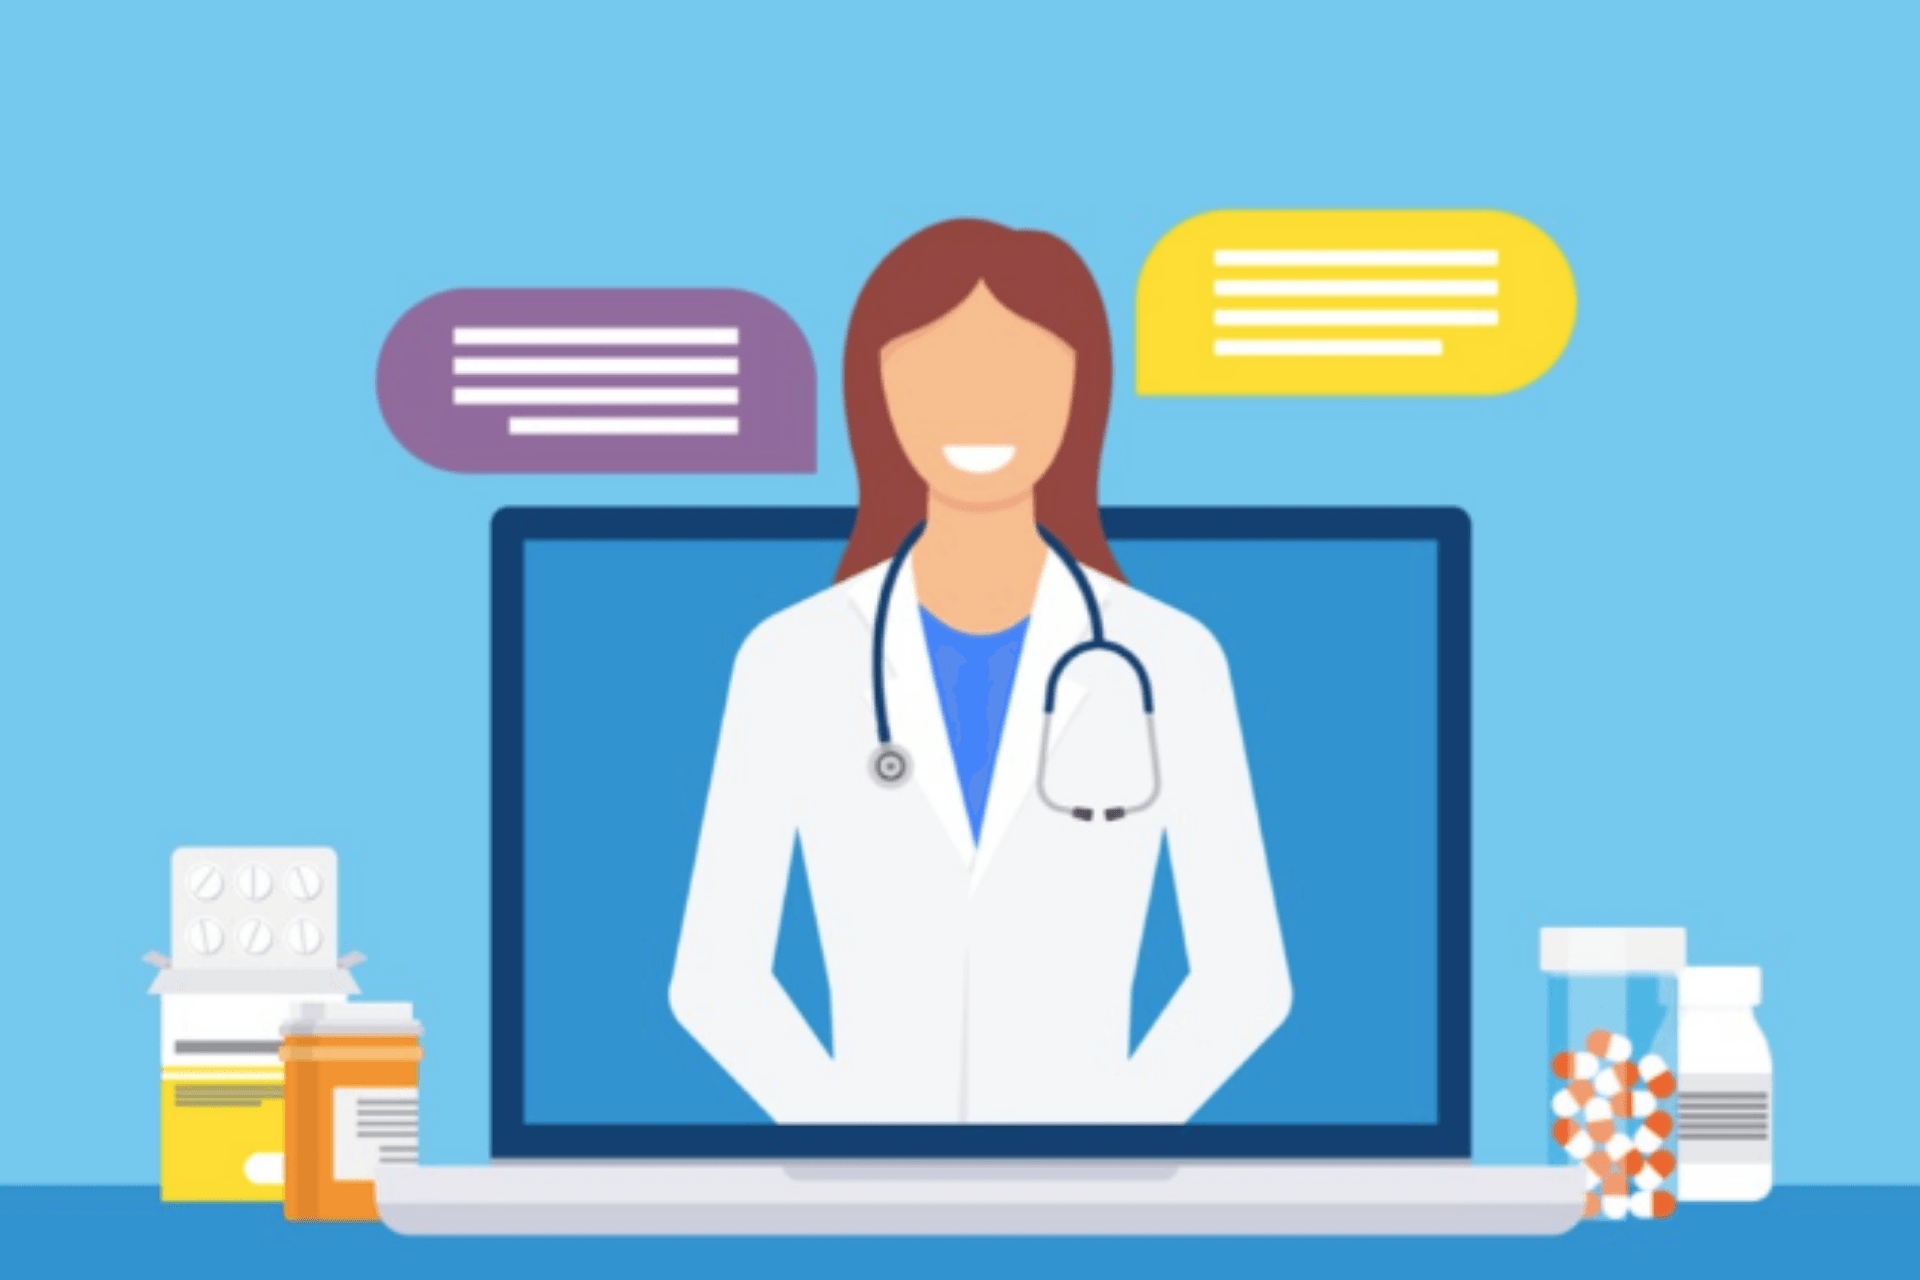 Patients embracing the growing trend of connecting with their doctor virtually.